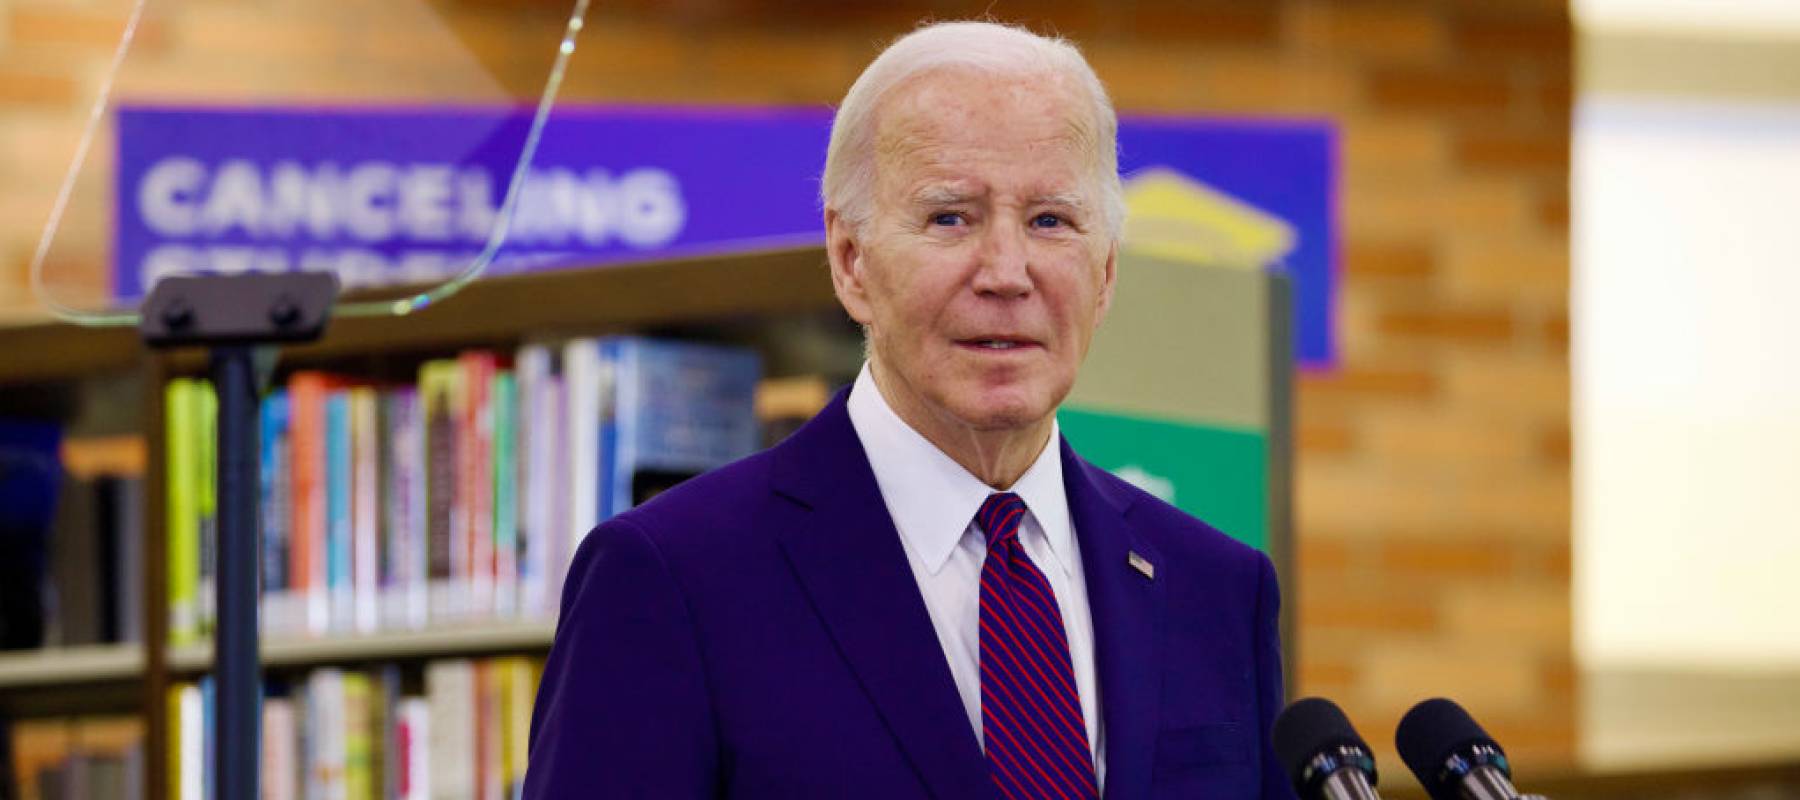 President Joe Biden announces the cancellation of an additional $1.2 billion in student loan debt for about 153,000 borrowers.